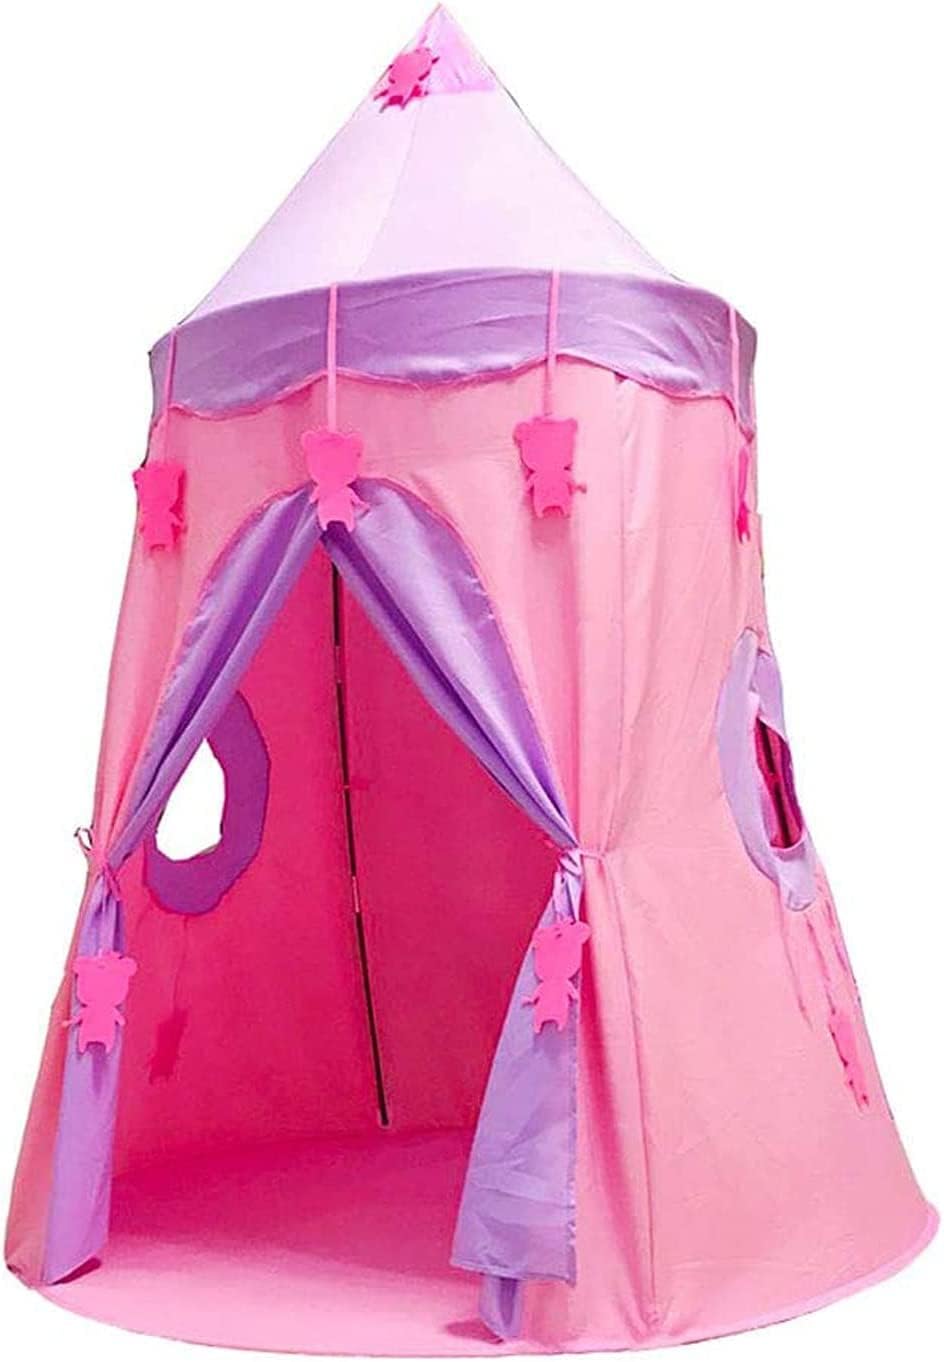 2023Kids Teepee Play Tent of Girls Toys Castle Play Tent Playhouse Best Pink Teepee For Your Children In 0-12 Years Old(Pink house)